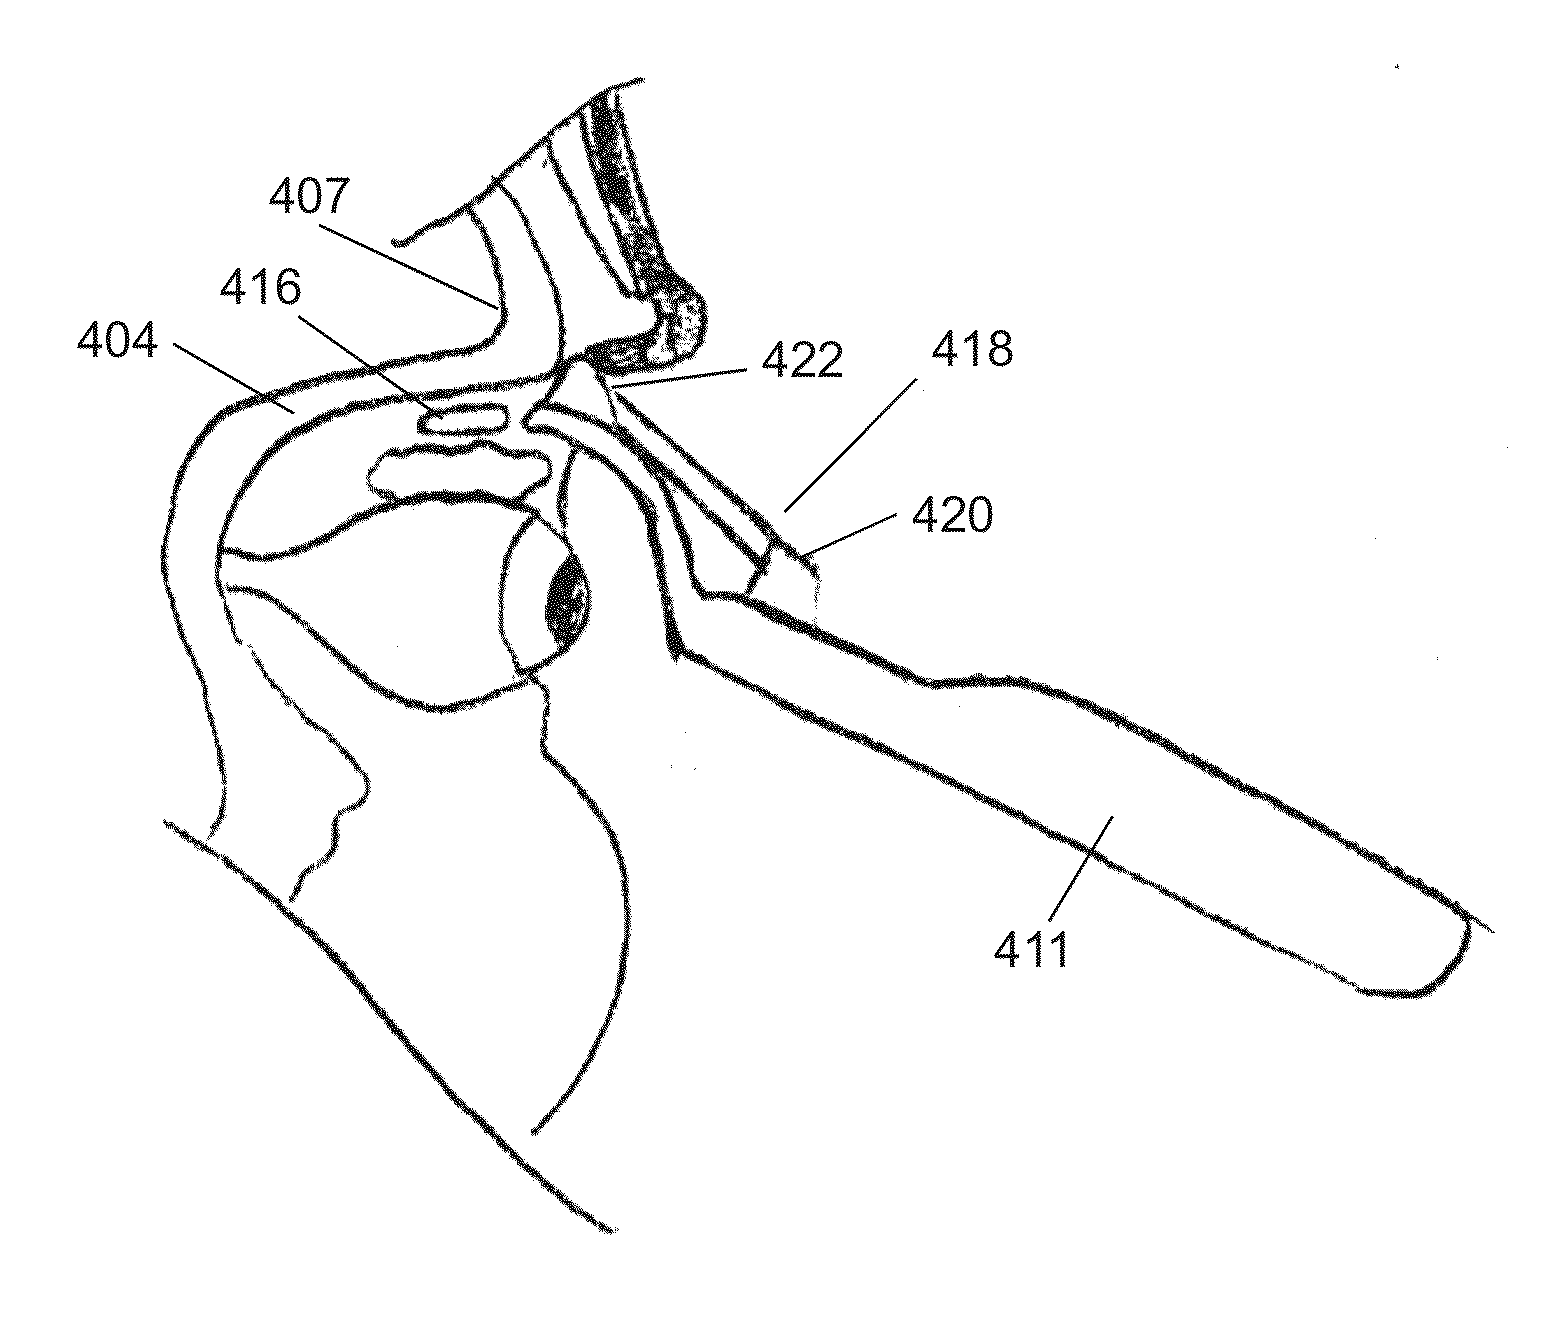 Implant delivery devices, systems, and methods